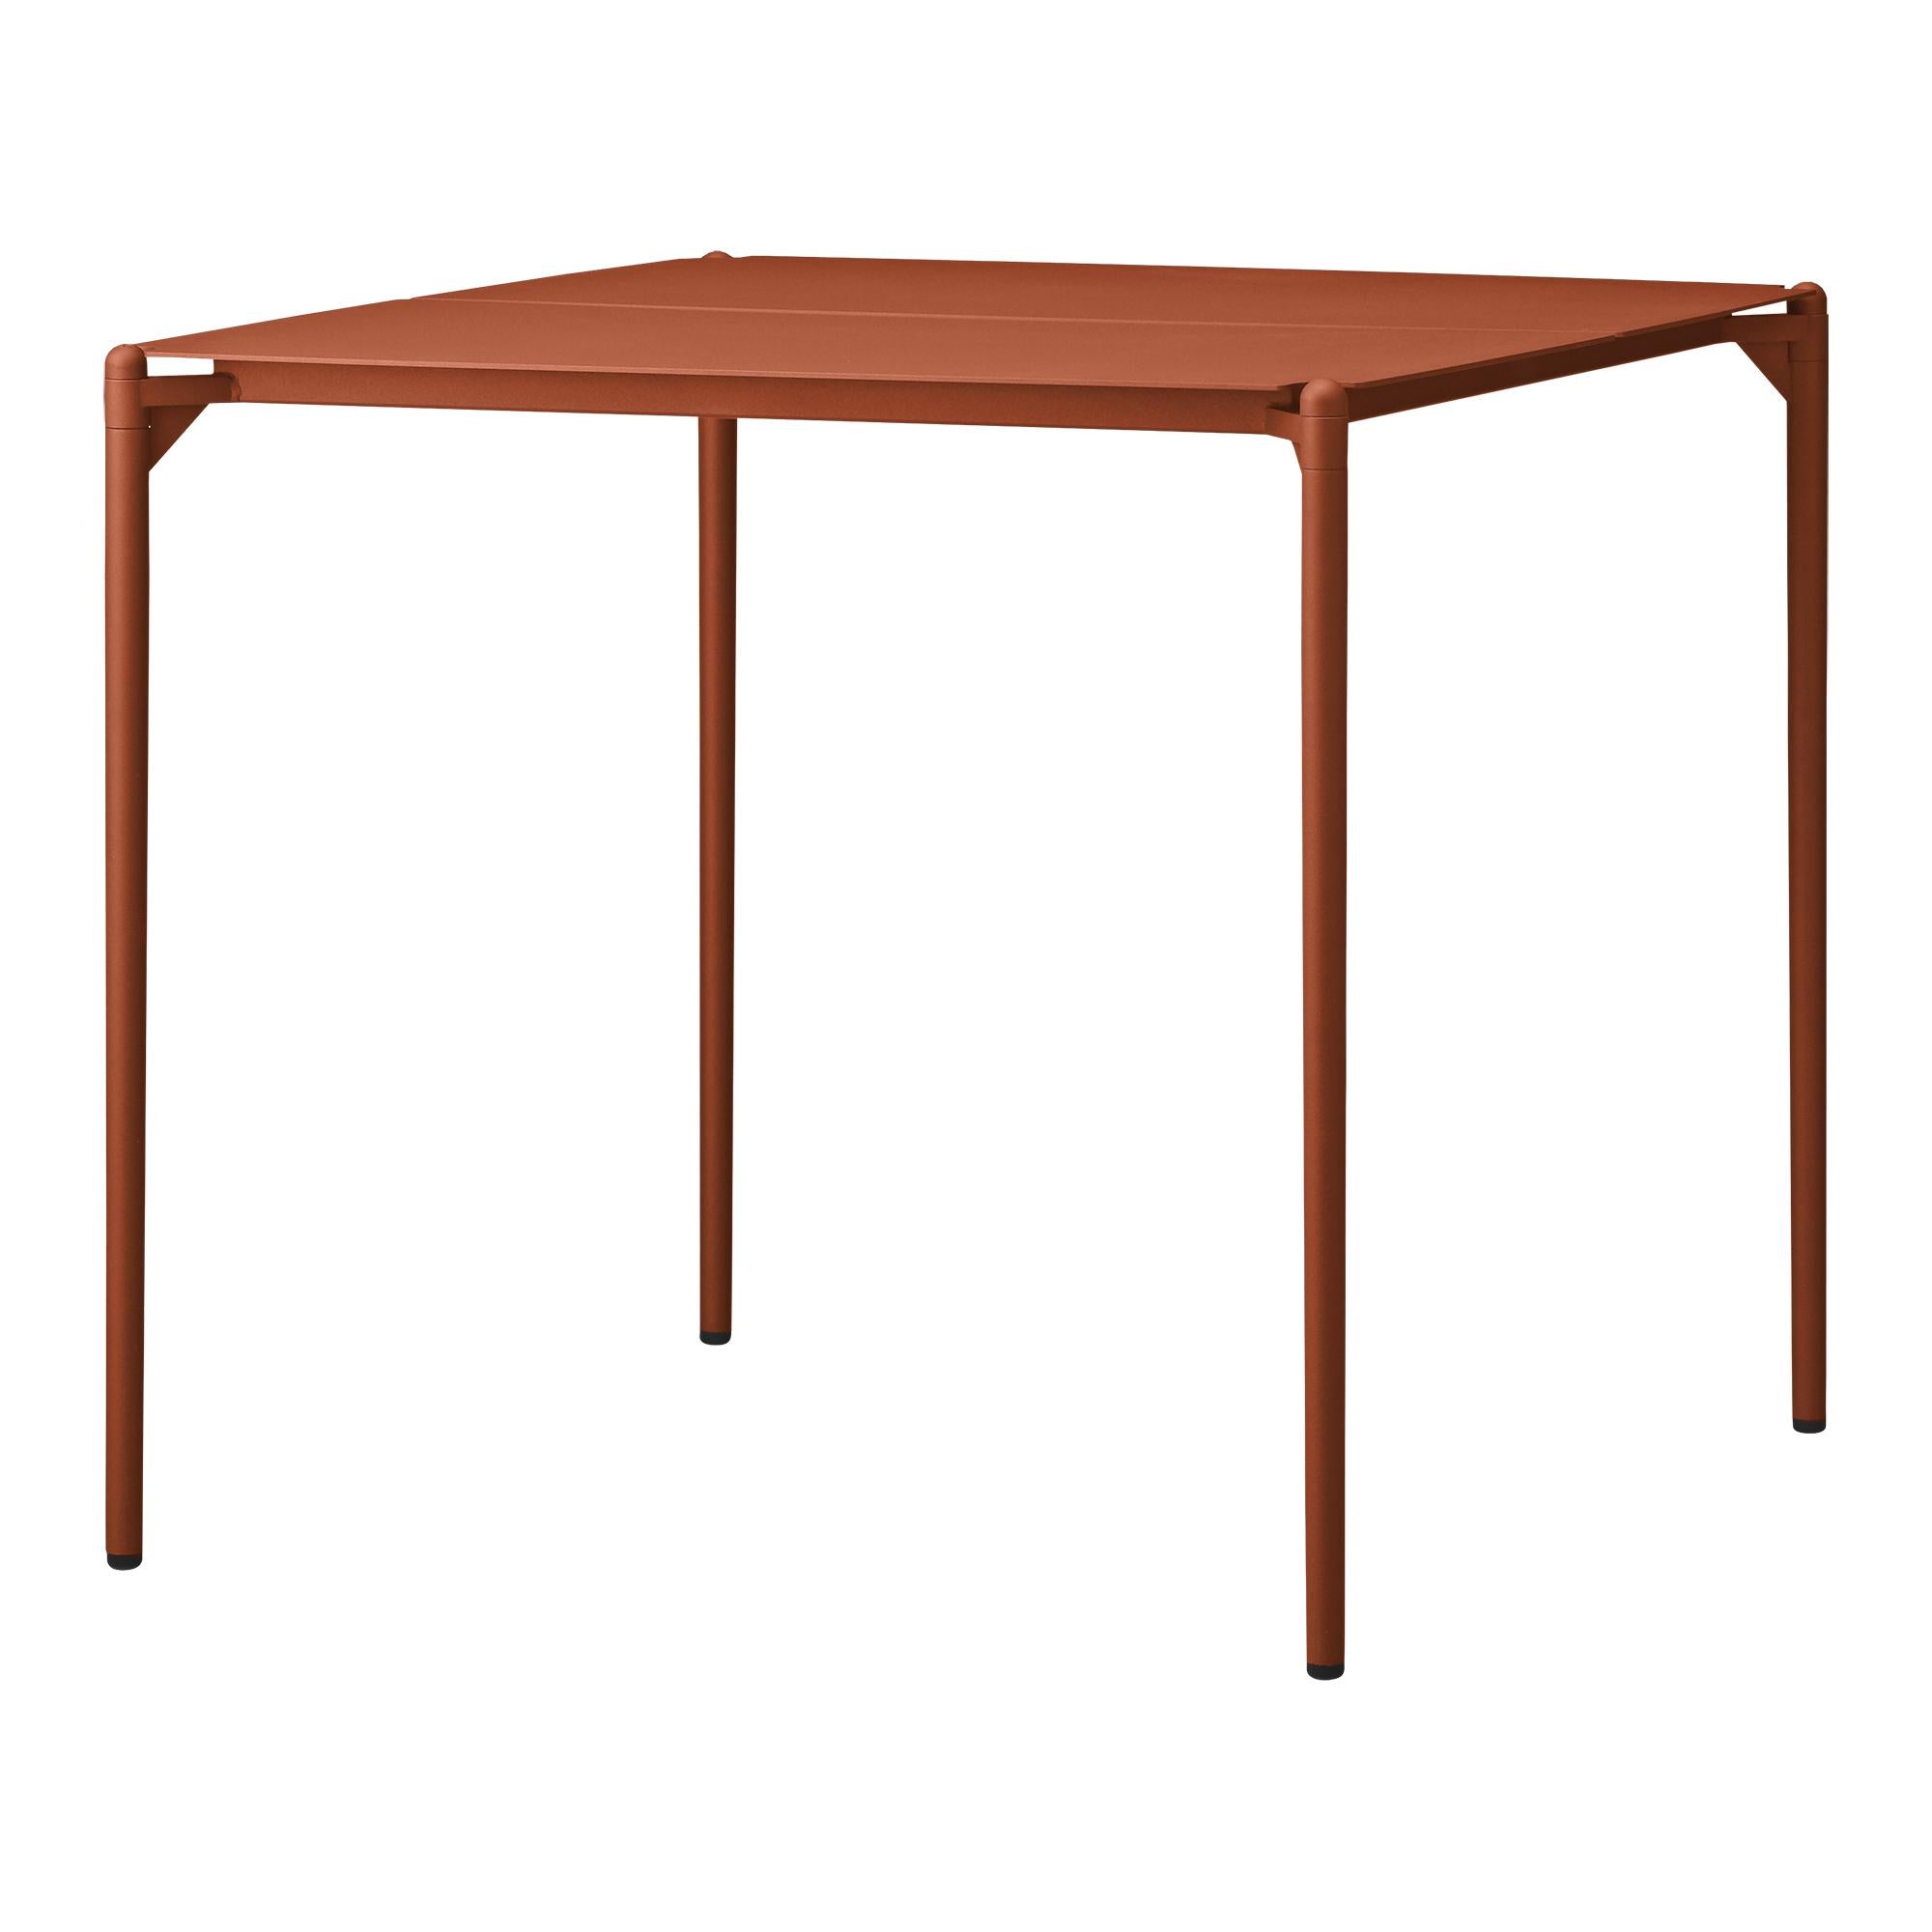 Small Ginger Bread Minimalist table
Dimensions: D 80 x W 80 x H 72 cm 
Materials: Steel w. Matte Powder Coating & Aluminum w. Matte Powder Coating
Available in colors: Taupe, Bordeaux, Forest, Ginger Bread, Black and, Black and Gold.


Bring